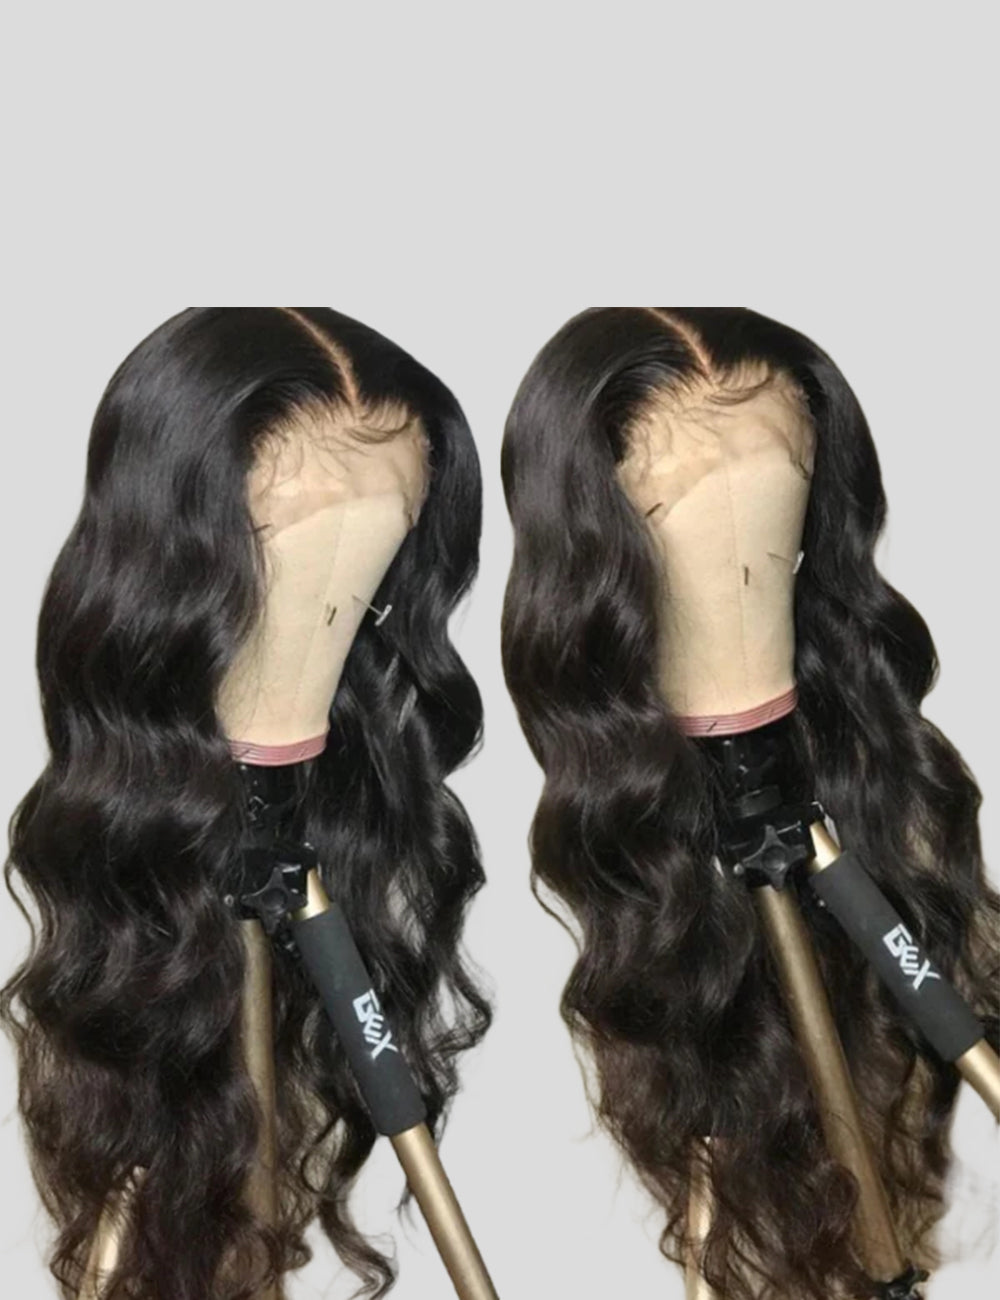 Body Wave Wig Lace Front Wig 13x4 Lace Frontal Human Hair Wig 32Inch Long Lace Wigs With Pre Plucked